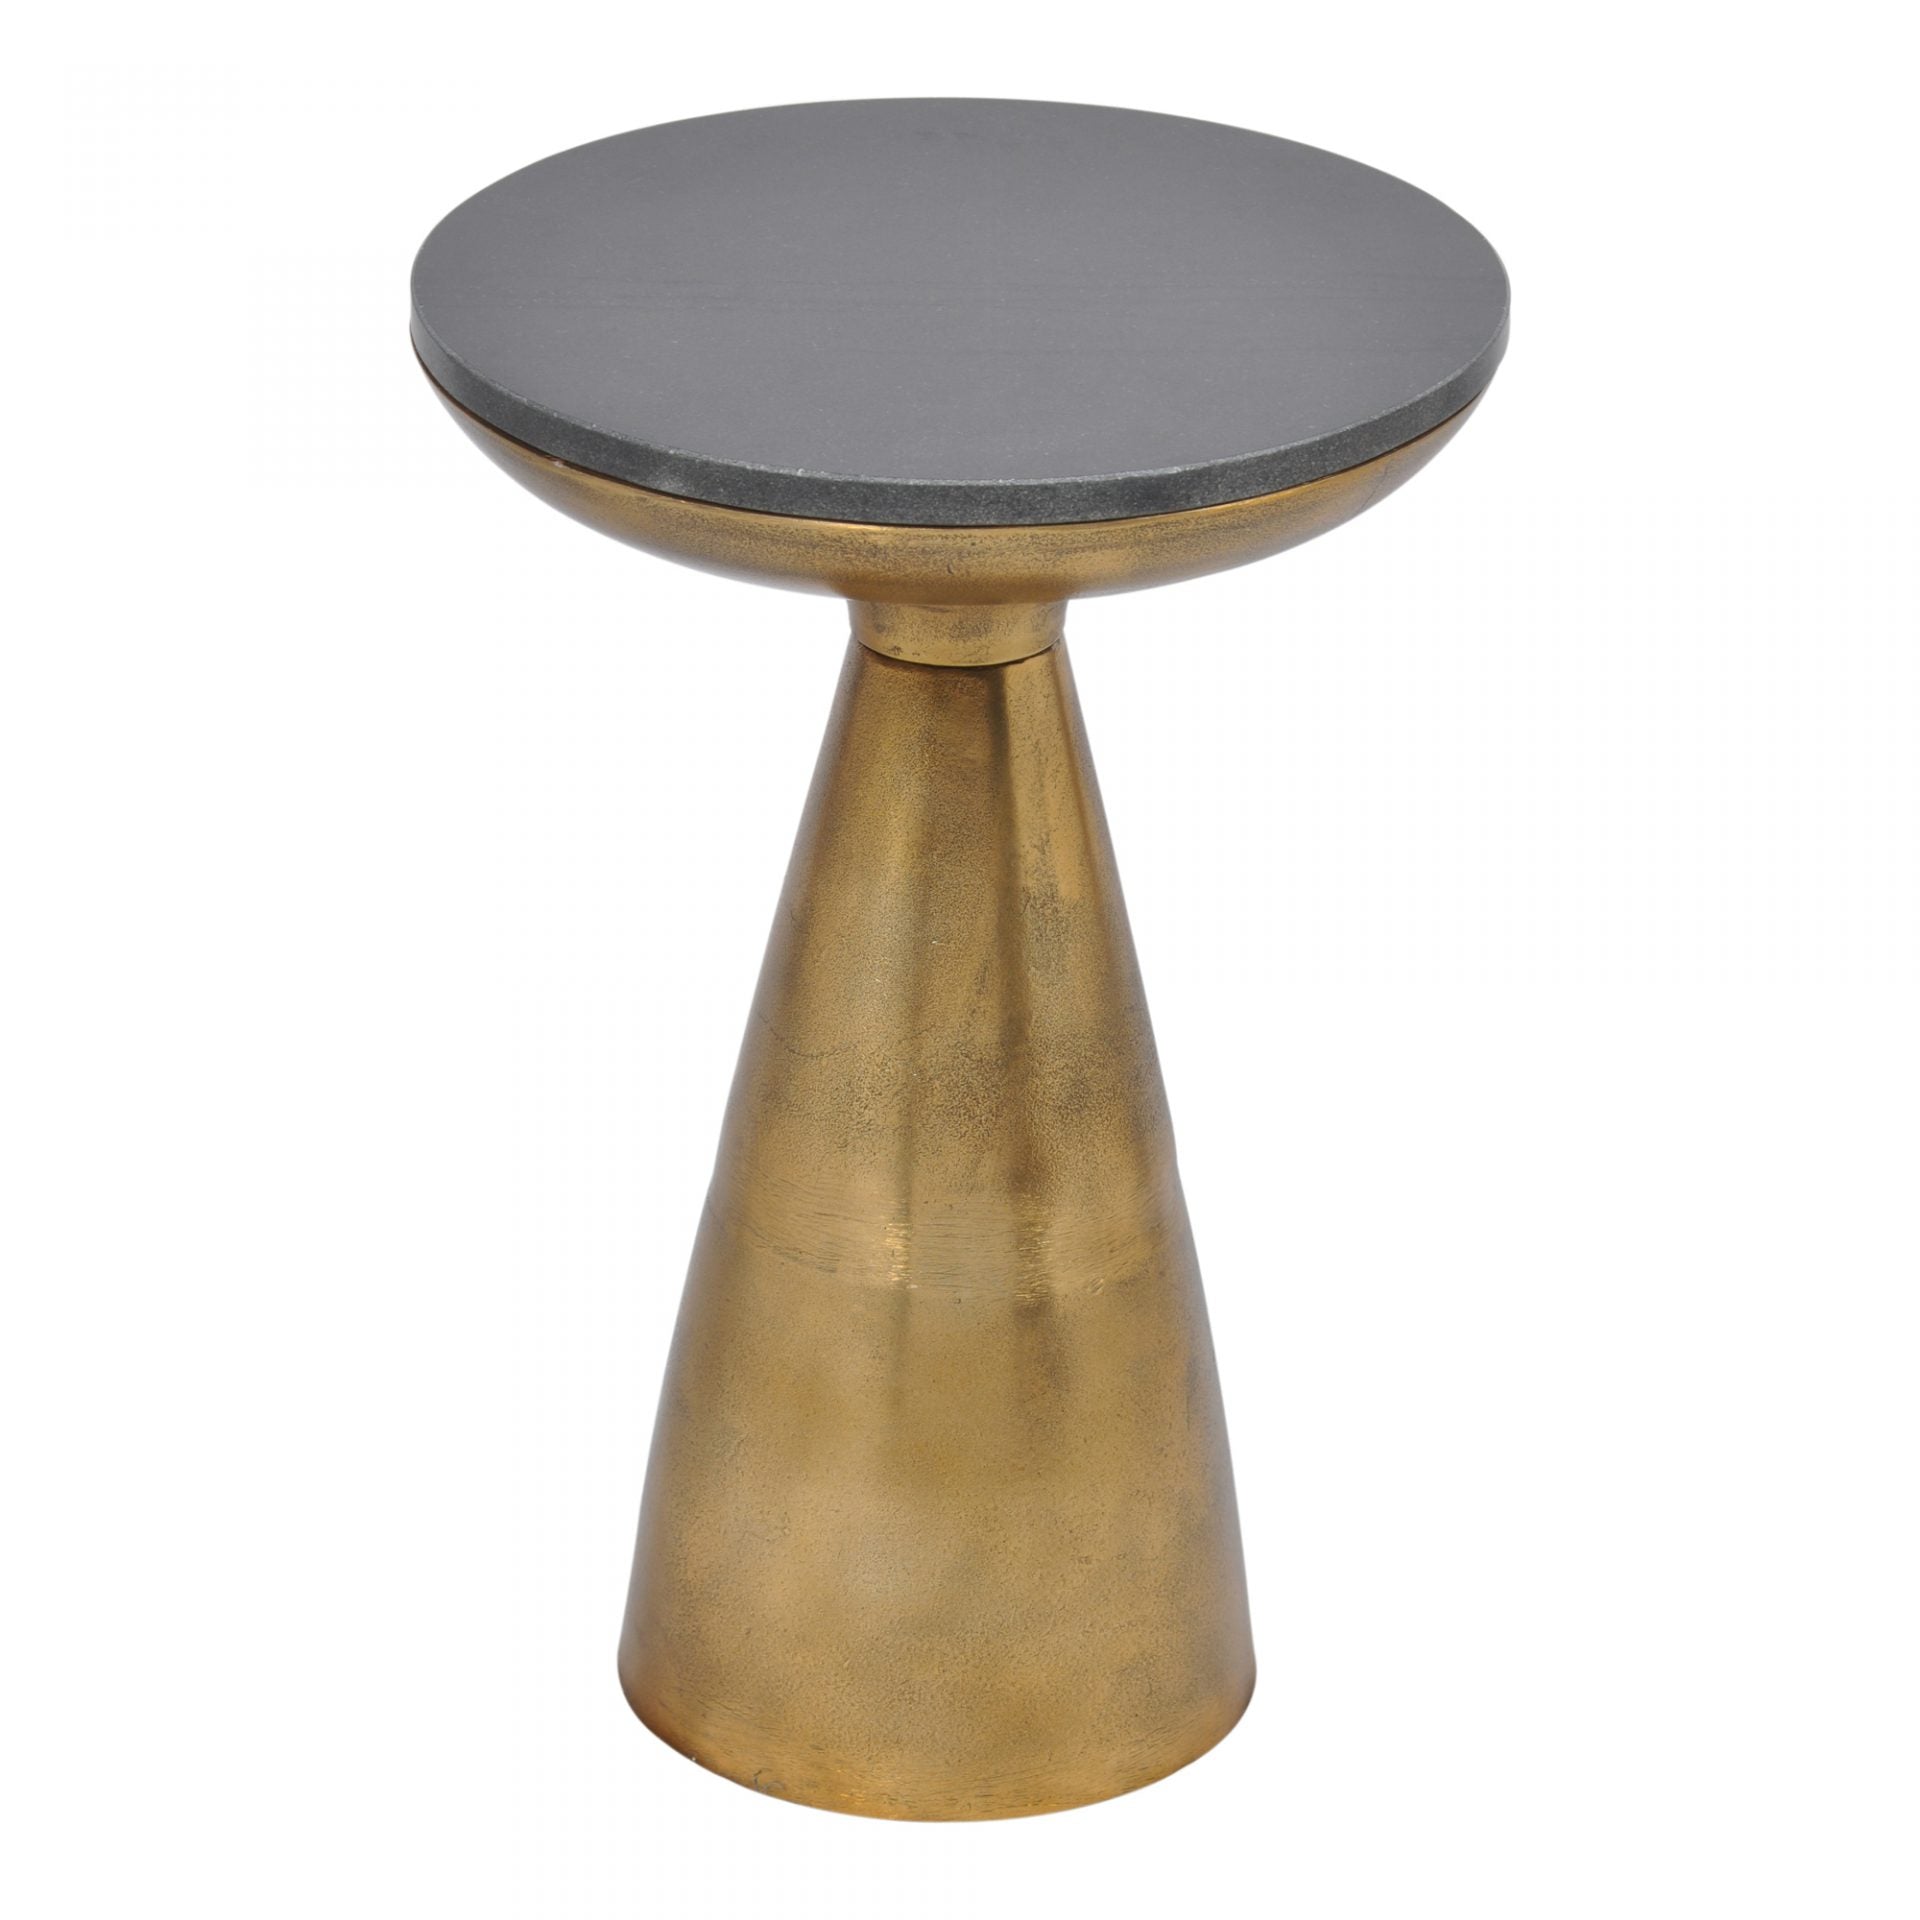 FONT ACCENT TABLE